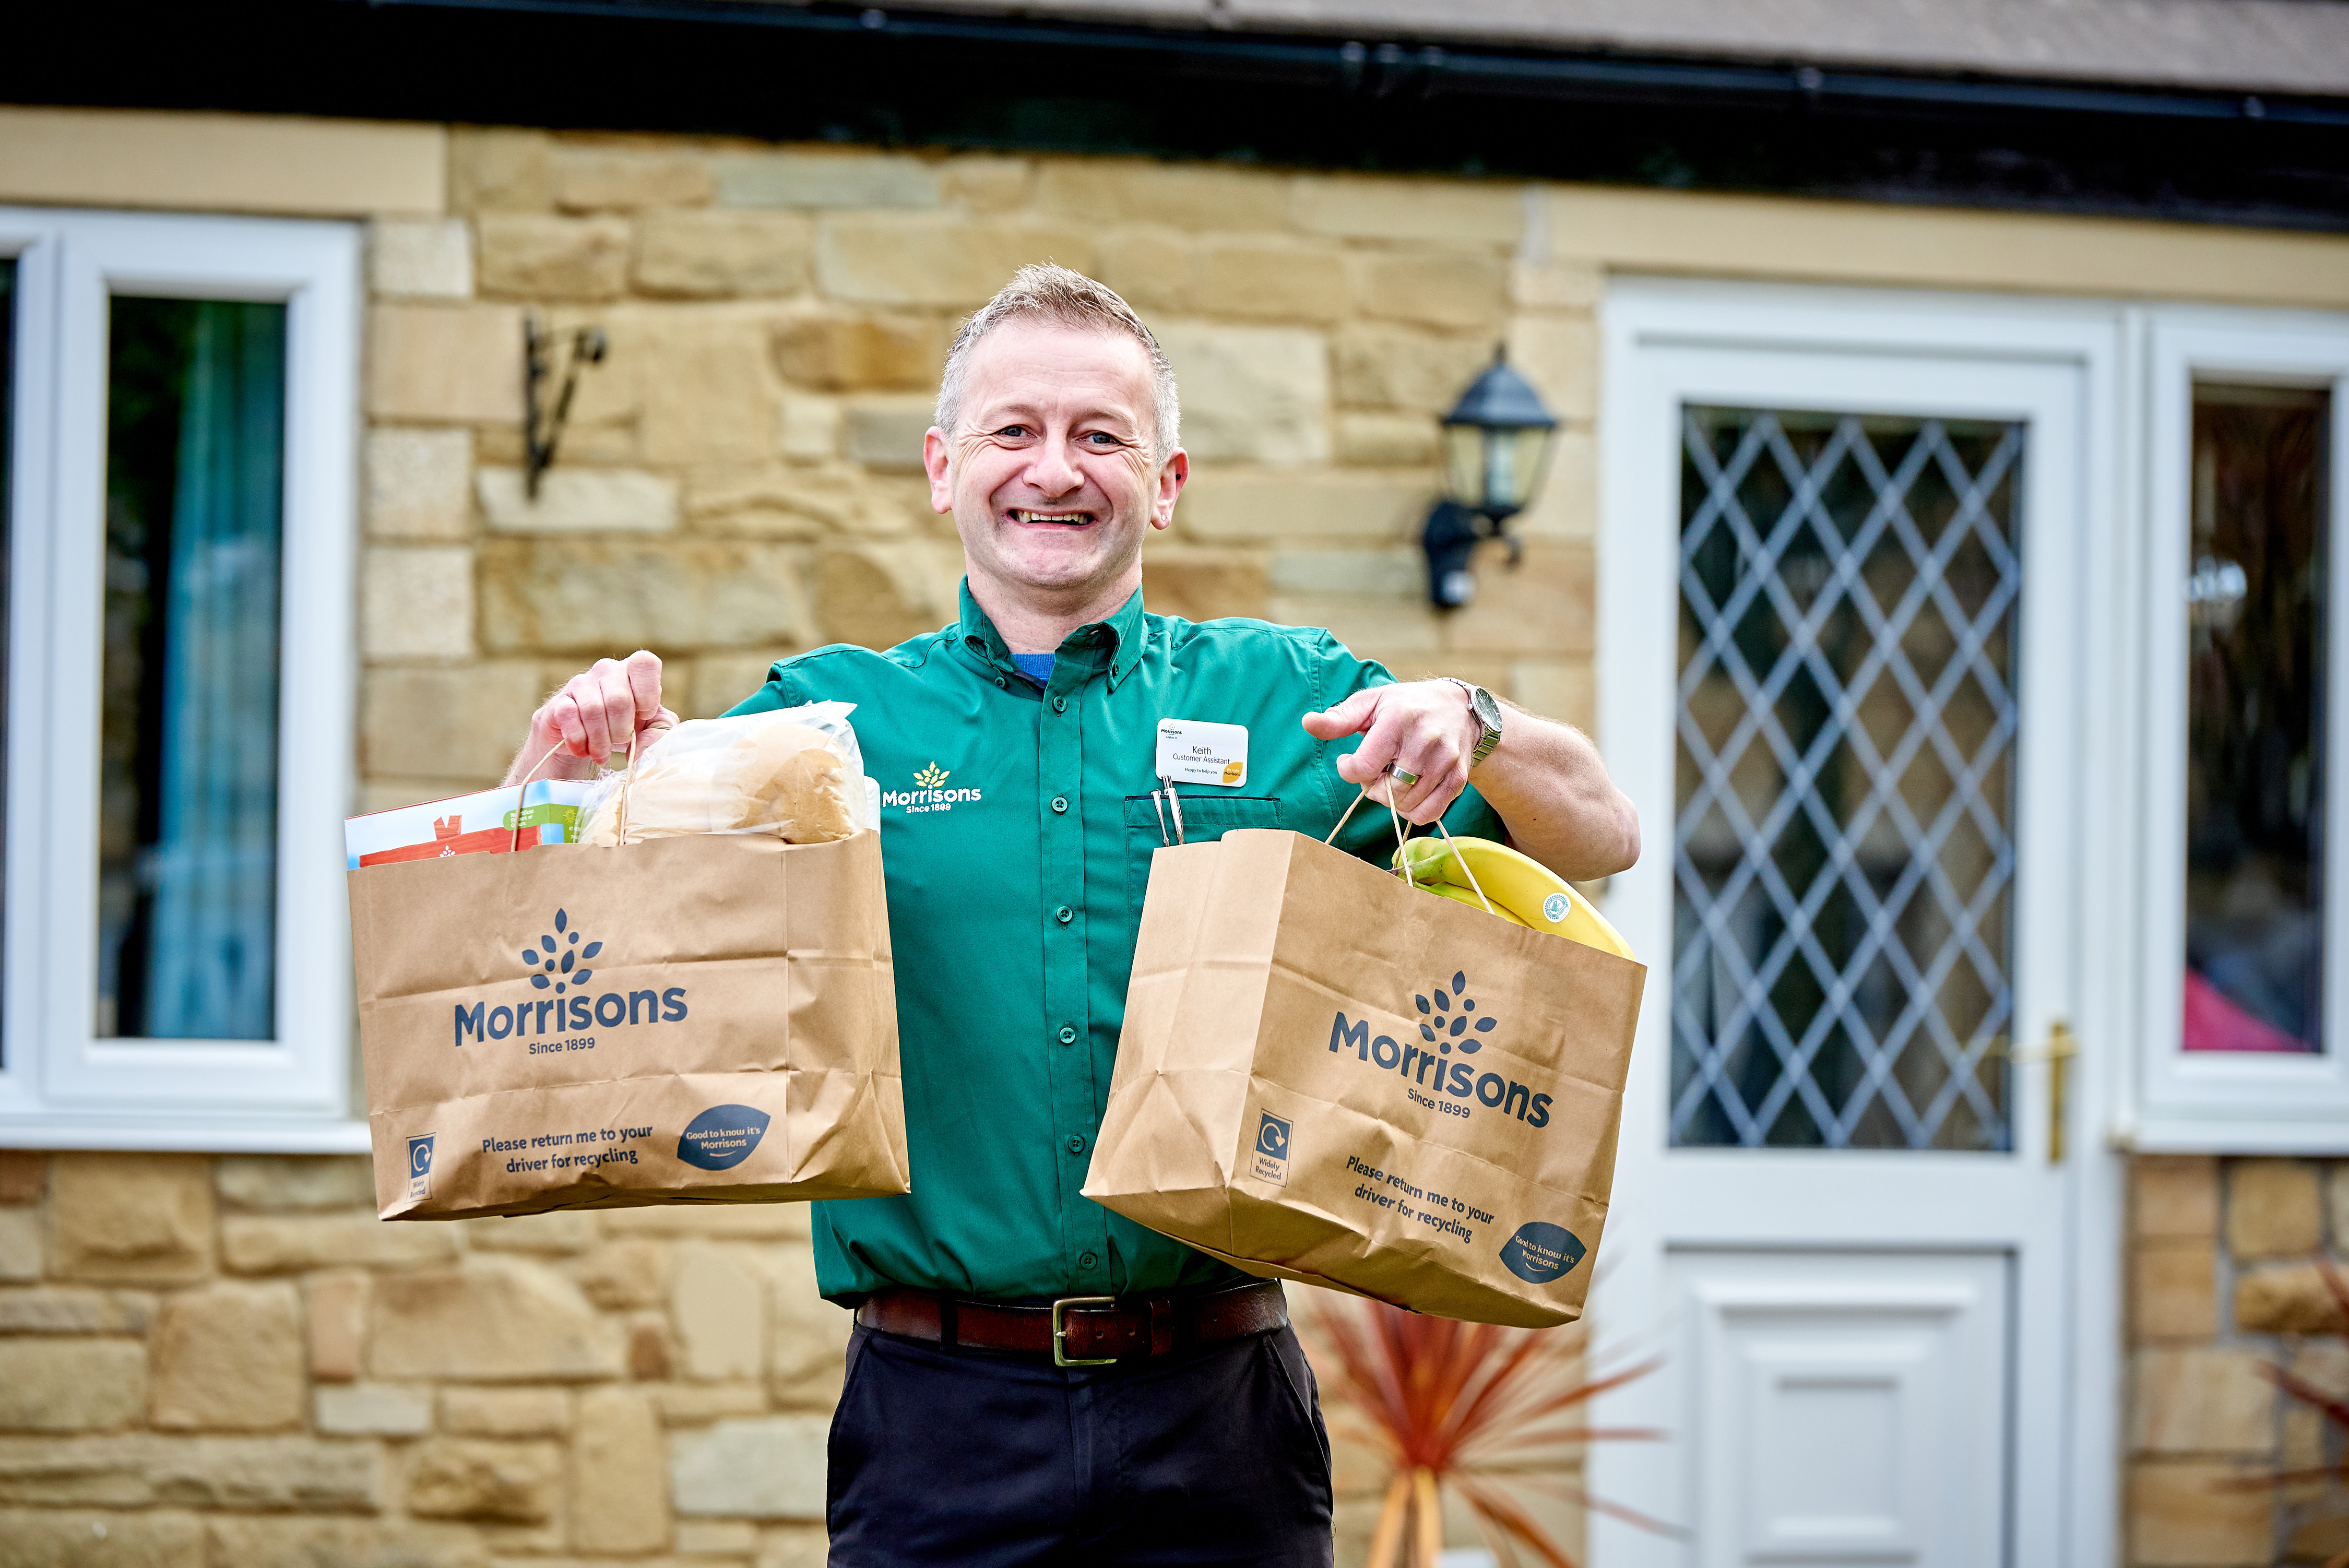 Morrisons introduces new measures aimed at helping vulnerable and elderly during crisis